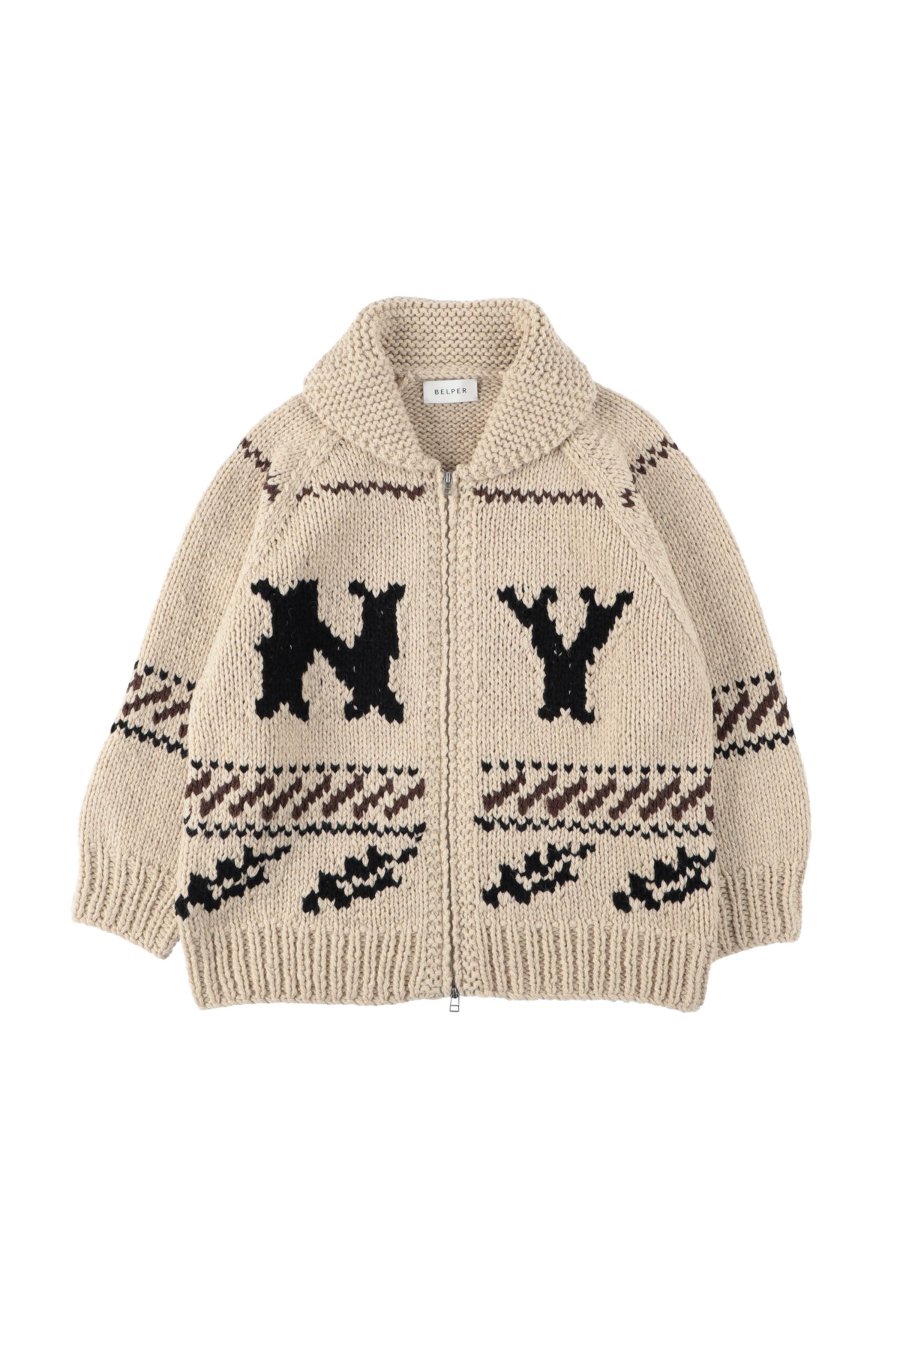 BELPER  22AW COWICHAN KNIT JACKET(BEIGE)<img class='new_mark_img2' src='https://img.shop-pro.jp/img/new/icons15.gif' style='border:none;display:inline;margin:0px;padding:0px;width:auto;' />